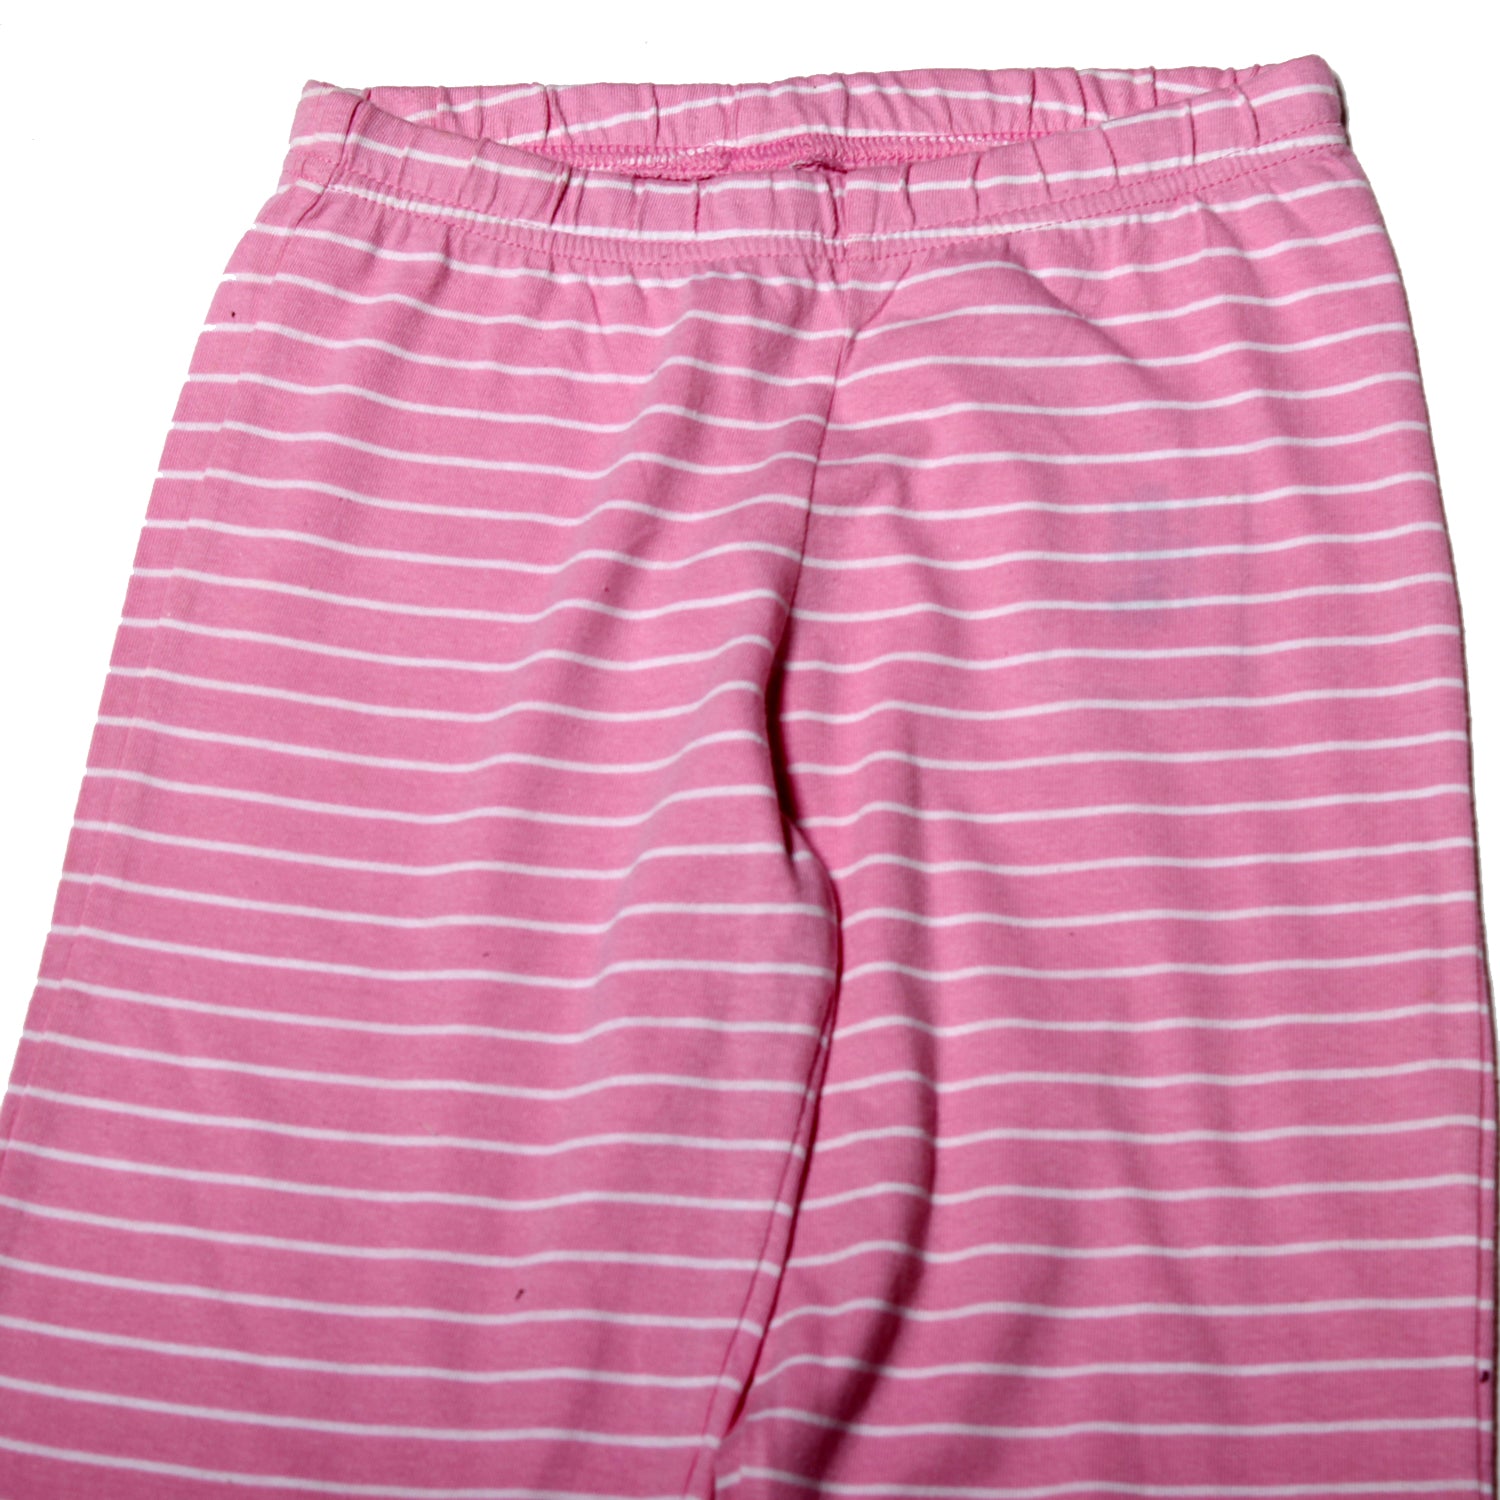 NEW BABY PINK WITH WHITE STRIPES PAJAMA FOR GIRLS